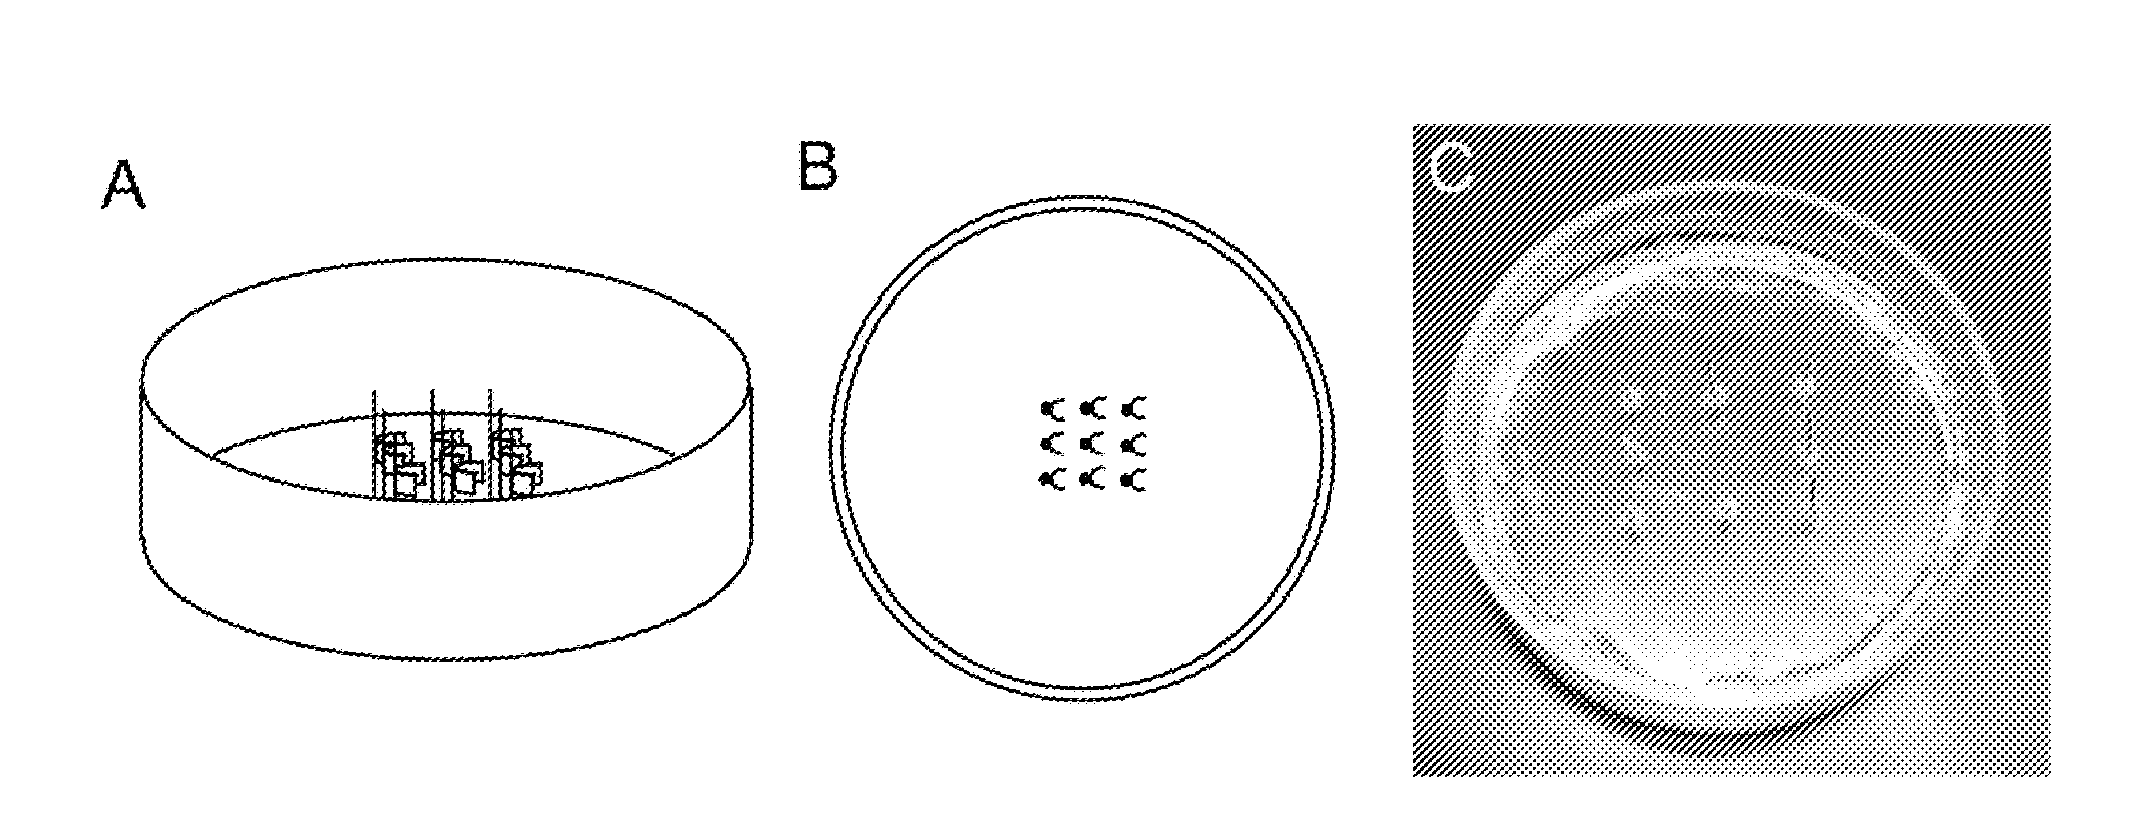 High throughput assays for determining contractile function and devices for use therein